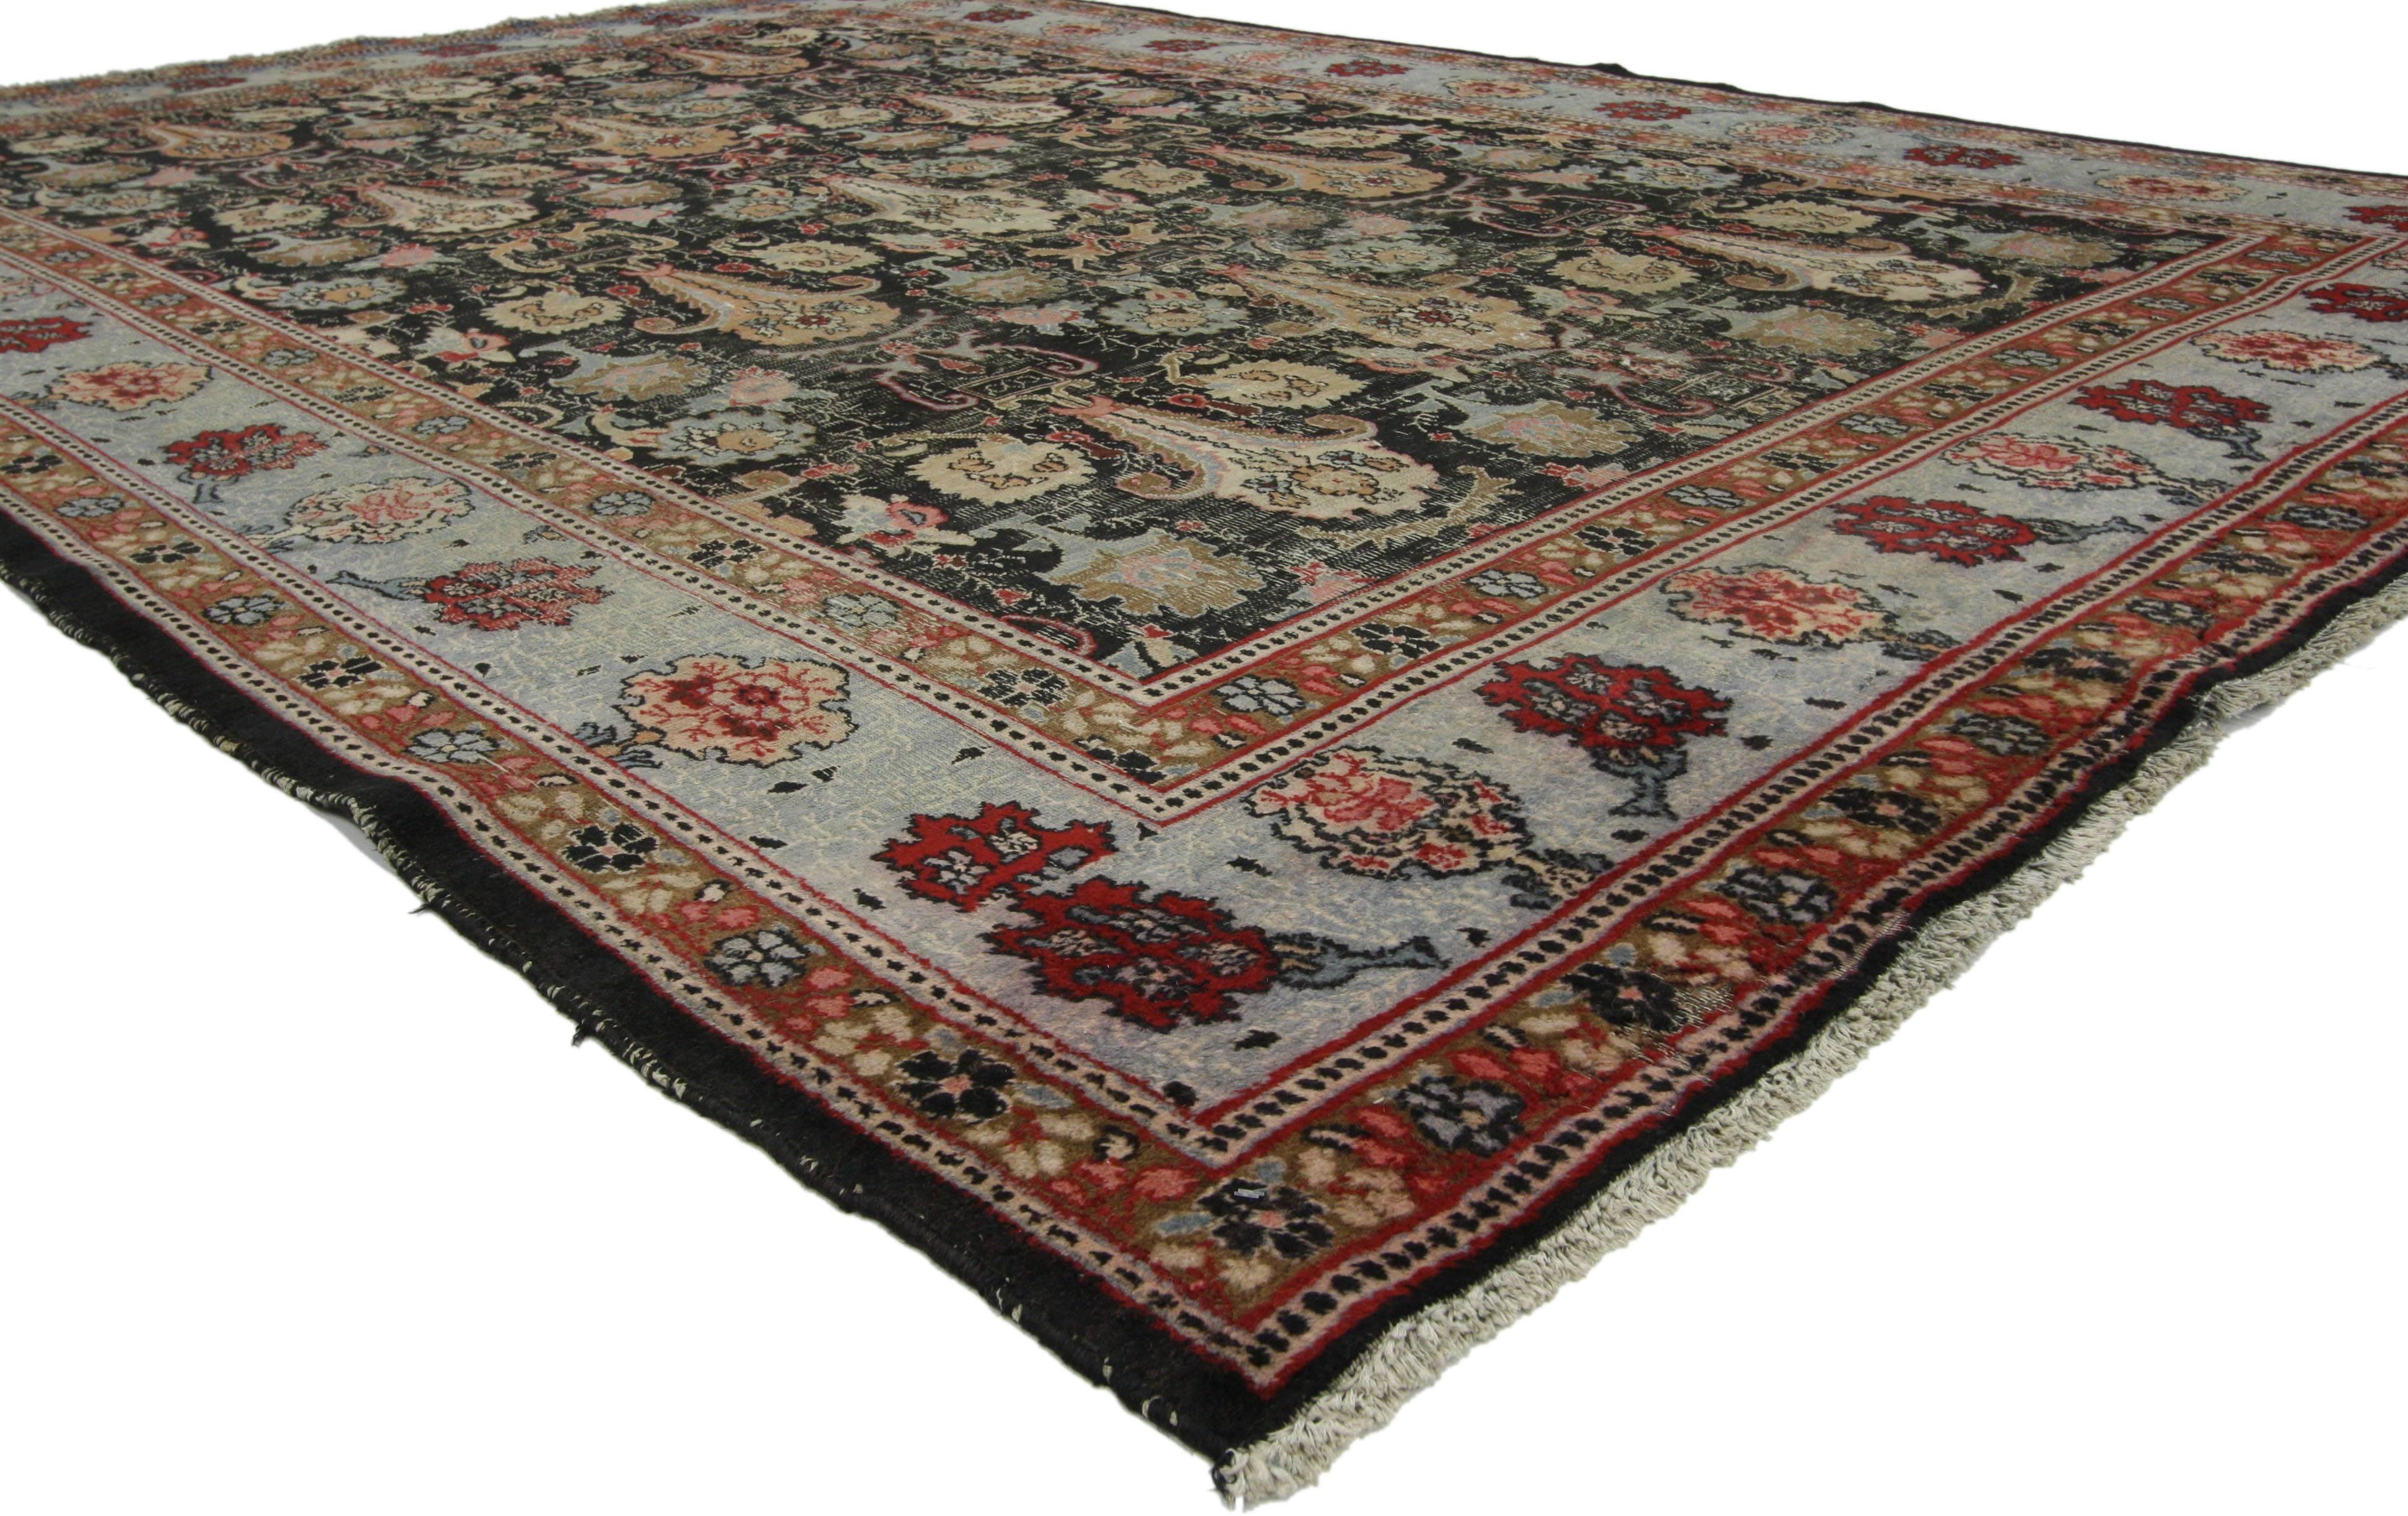 ?73046 Distressed Antique Persian Khorassan rug with Modern Rustic American Colonial style 06'11 x 10'03. ?With its incredible level of detail and texture, this hand-knotted wool distressed antique Persian Khorassan rug is full of character and